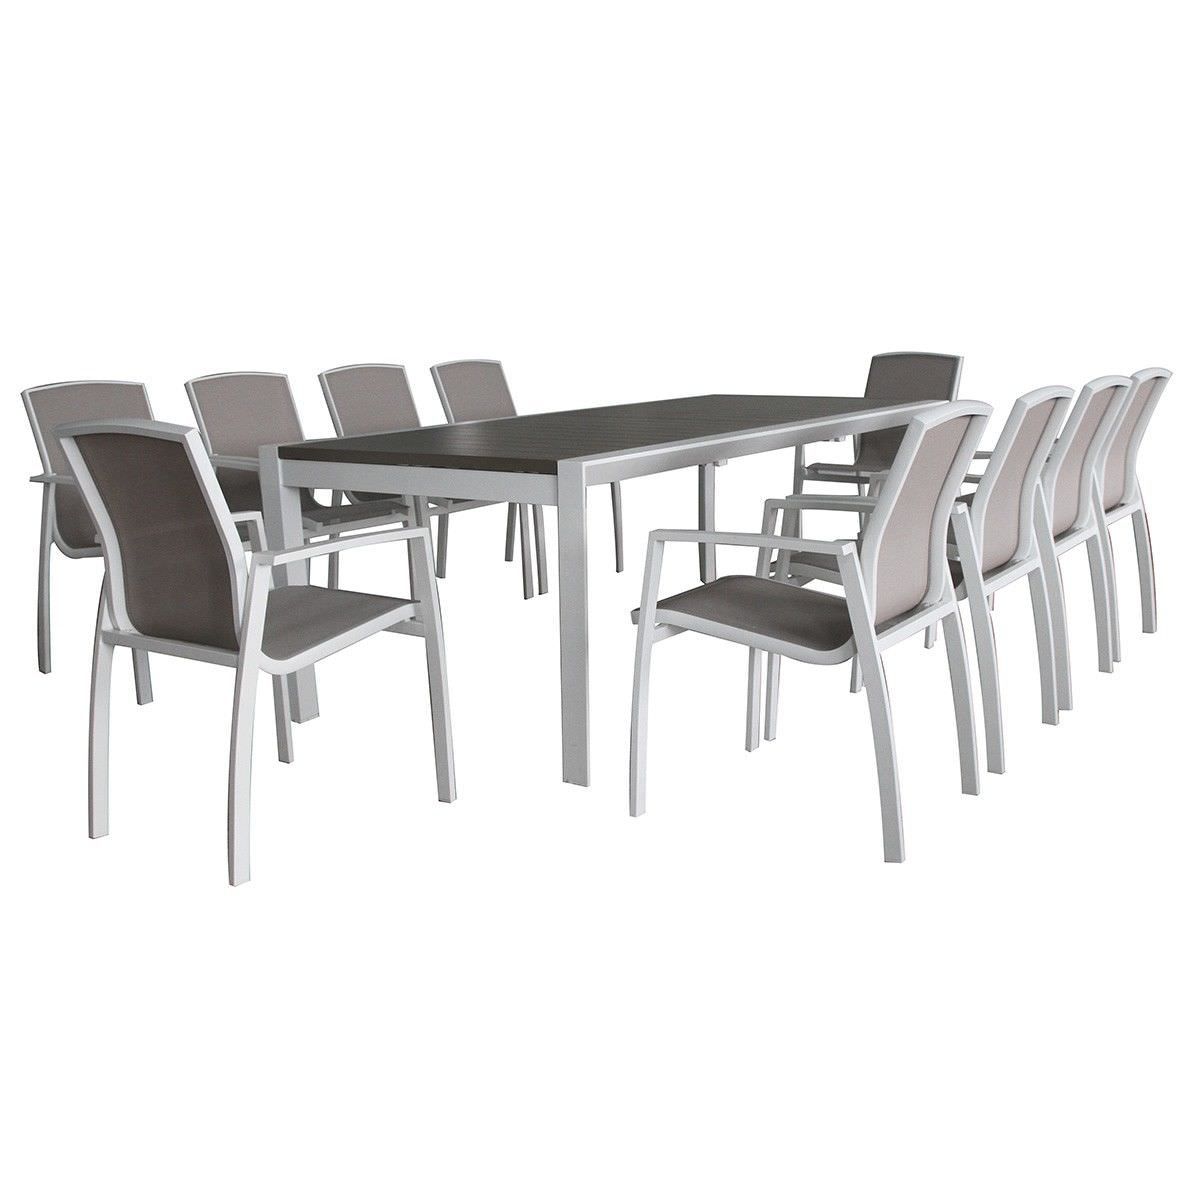 Ruby 11 Piece Aluminium Outdoor Extensible Dining Table Set, 220Cm Throughout 11 Piece Extendable Patio Dining Sets (View 15 of 15)